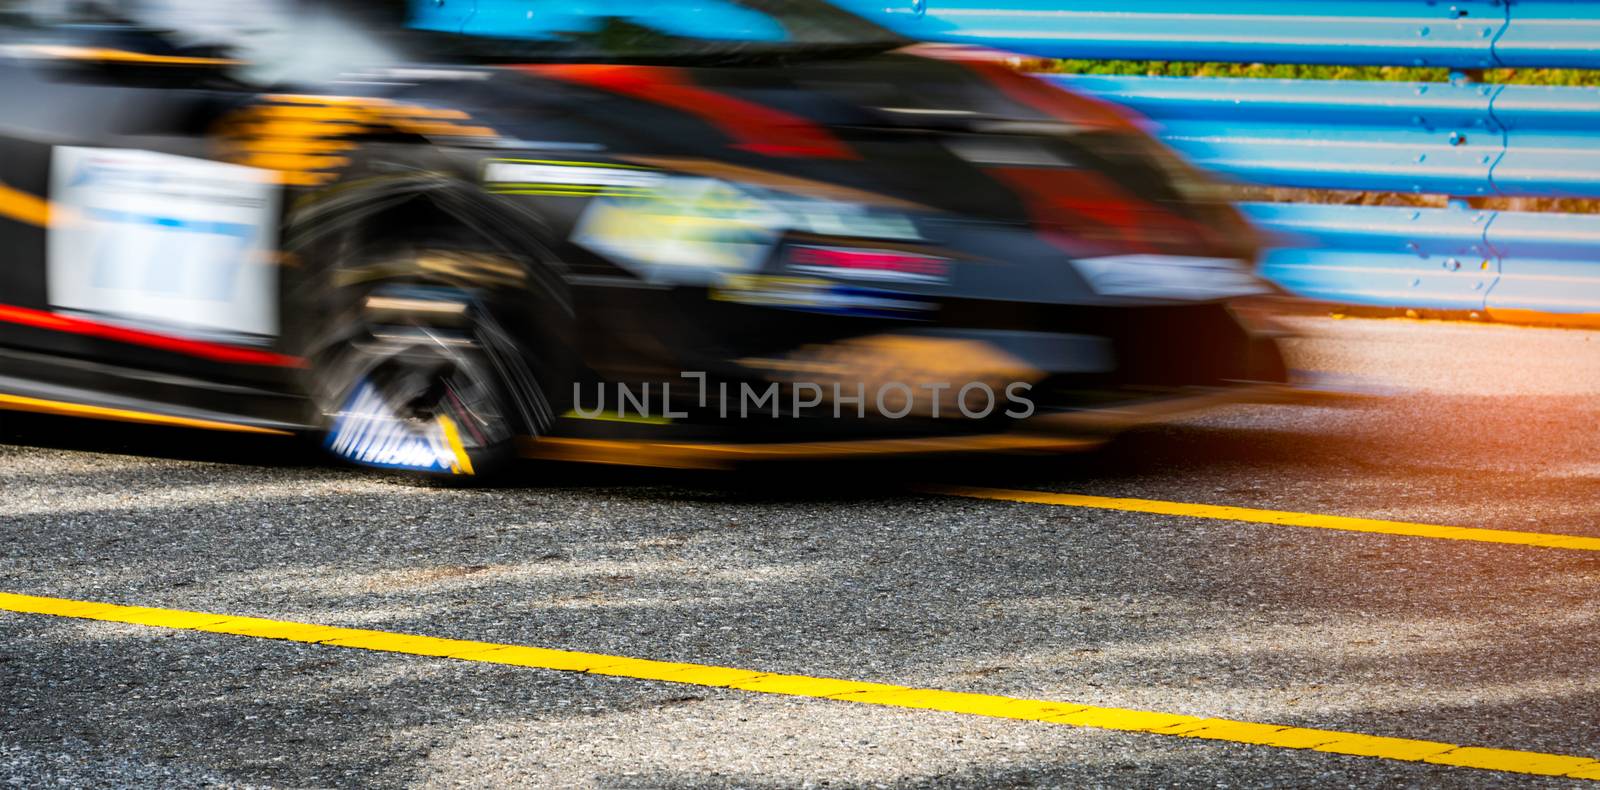 Motor sport car racing on asphalt road with blue fence and yellow line traffic sign. Car with fast speed driving and motion blurred. Black racing car with red and yellow stripes. Car on racetrack. by Fahroni